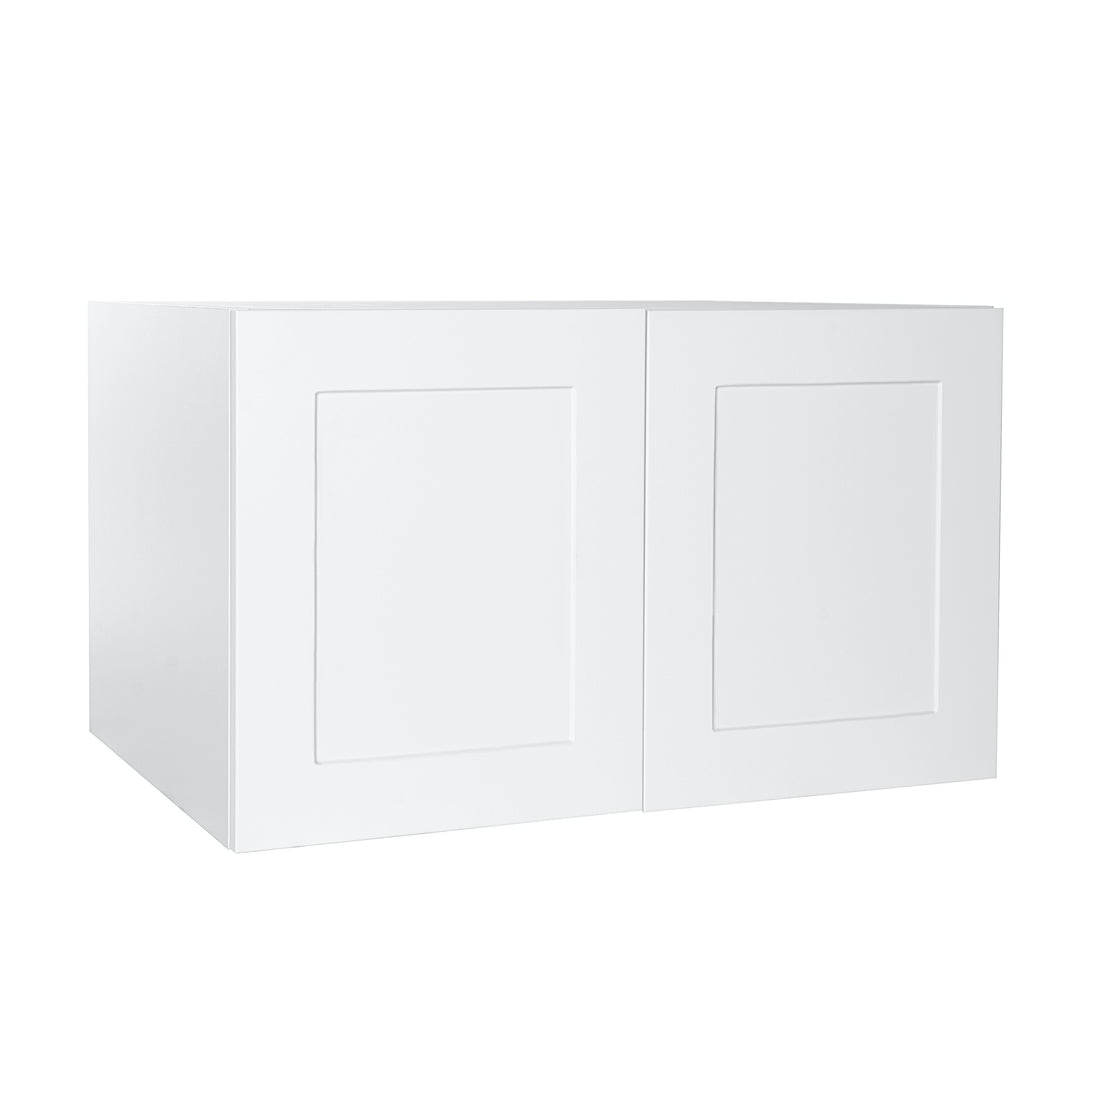 Quick Assemble Modern Style with Soft Close, White Shaker Wall Bridge Kitchen Cabinet (36 in W x 18 in H x 24 in D) -  Pro-Edge HD